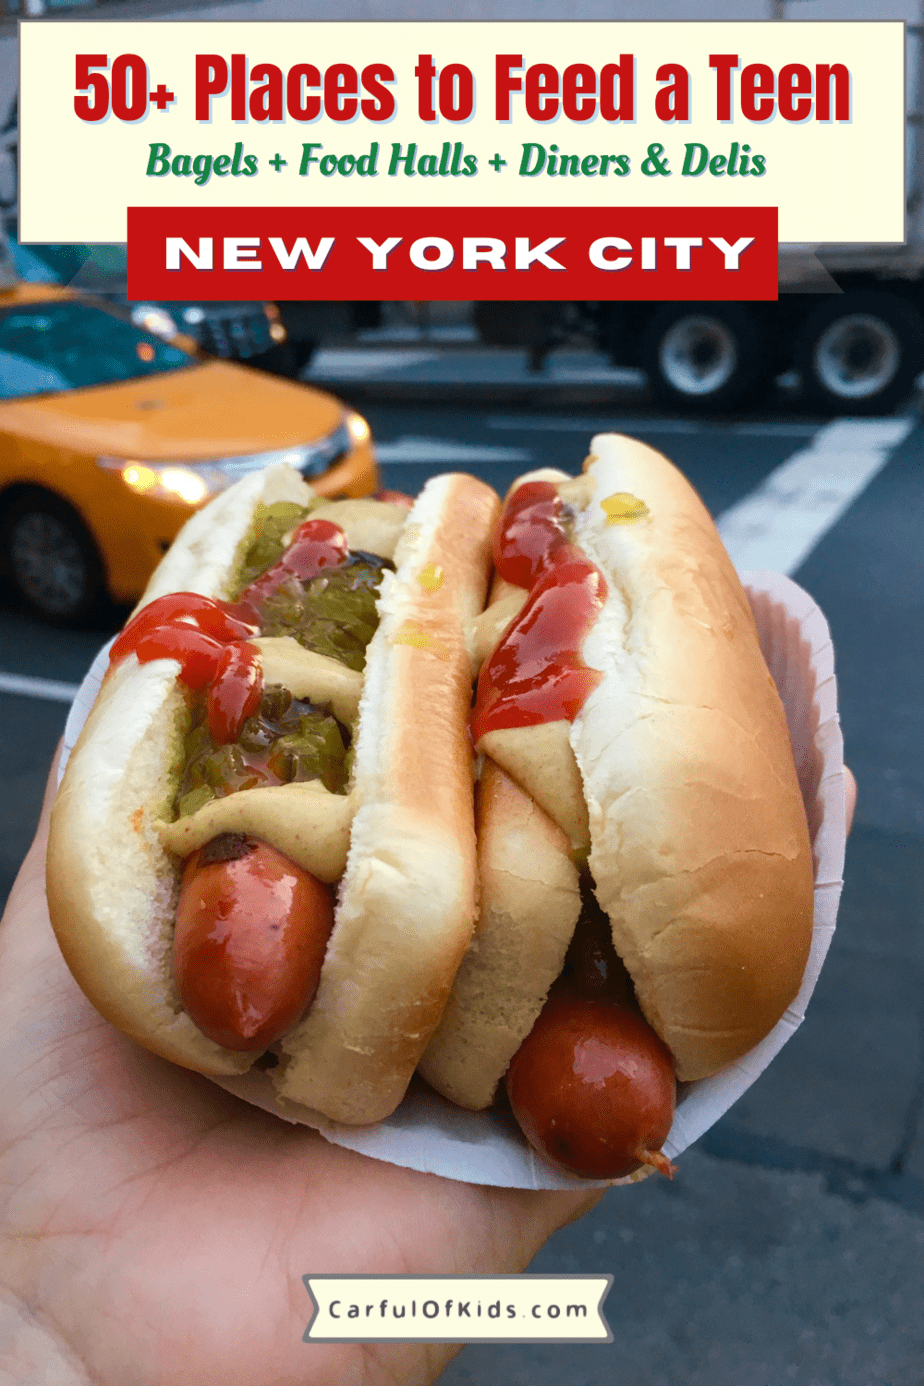 If you're headed to NYC with teens or kids, then here's a list of 50+ places to feed them. Get all the best of New York City with bagels and bakeries, hamburgers and hotdogs along with lots of pizza and ice cream too. Best Places for Families to Eat in NYC | Best Bagels in NYC | Best Ice Cream in NYC | Best Pizza in NYC | NYC Food Halls #NYC #NewYork #Foodie